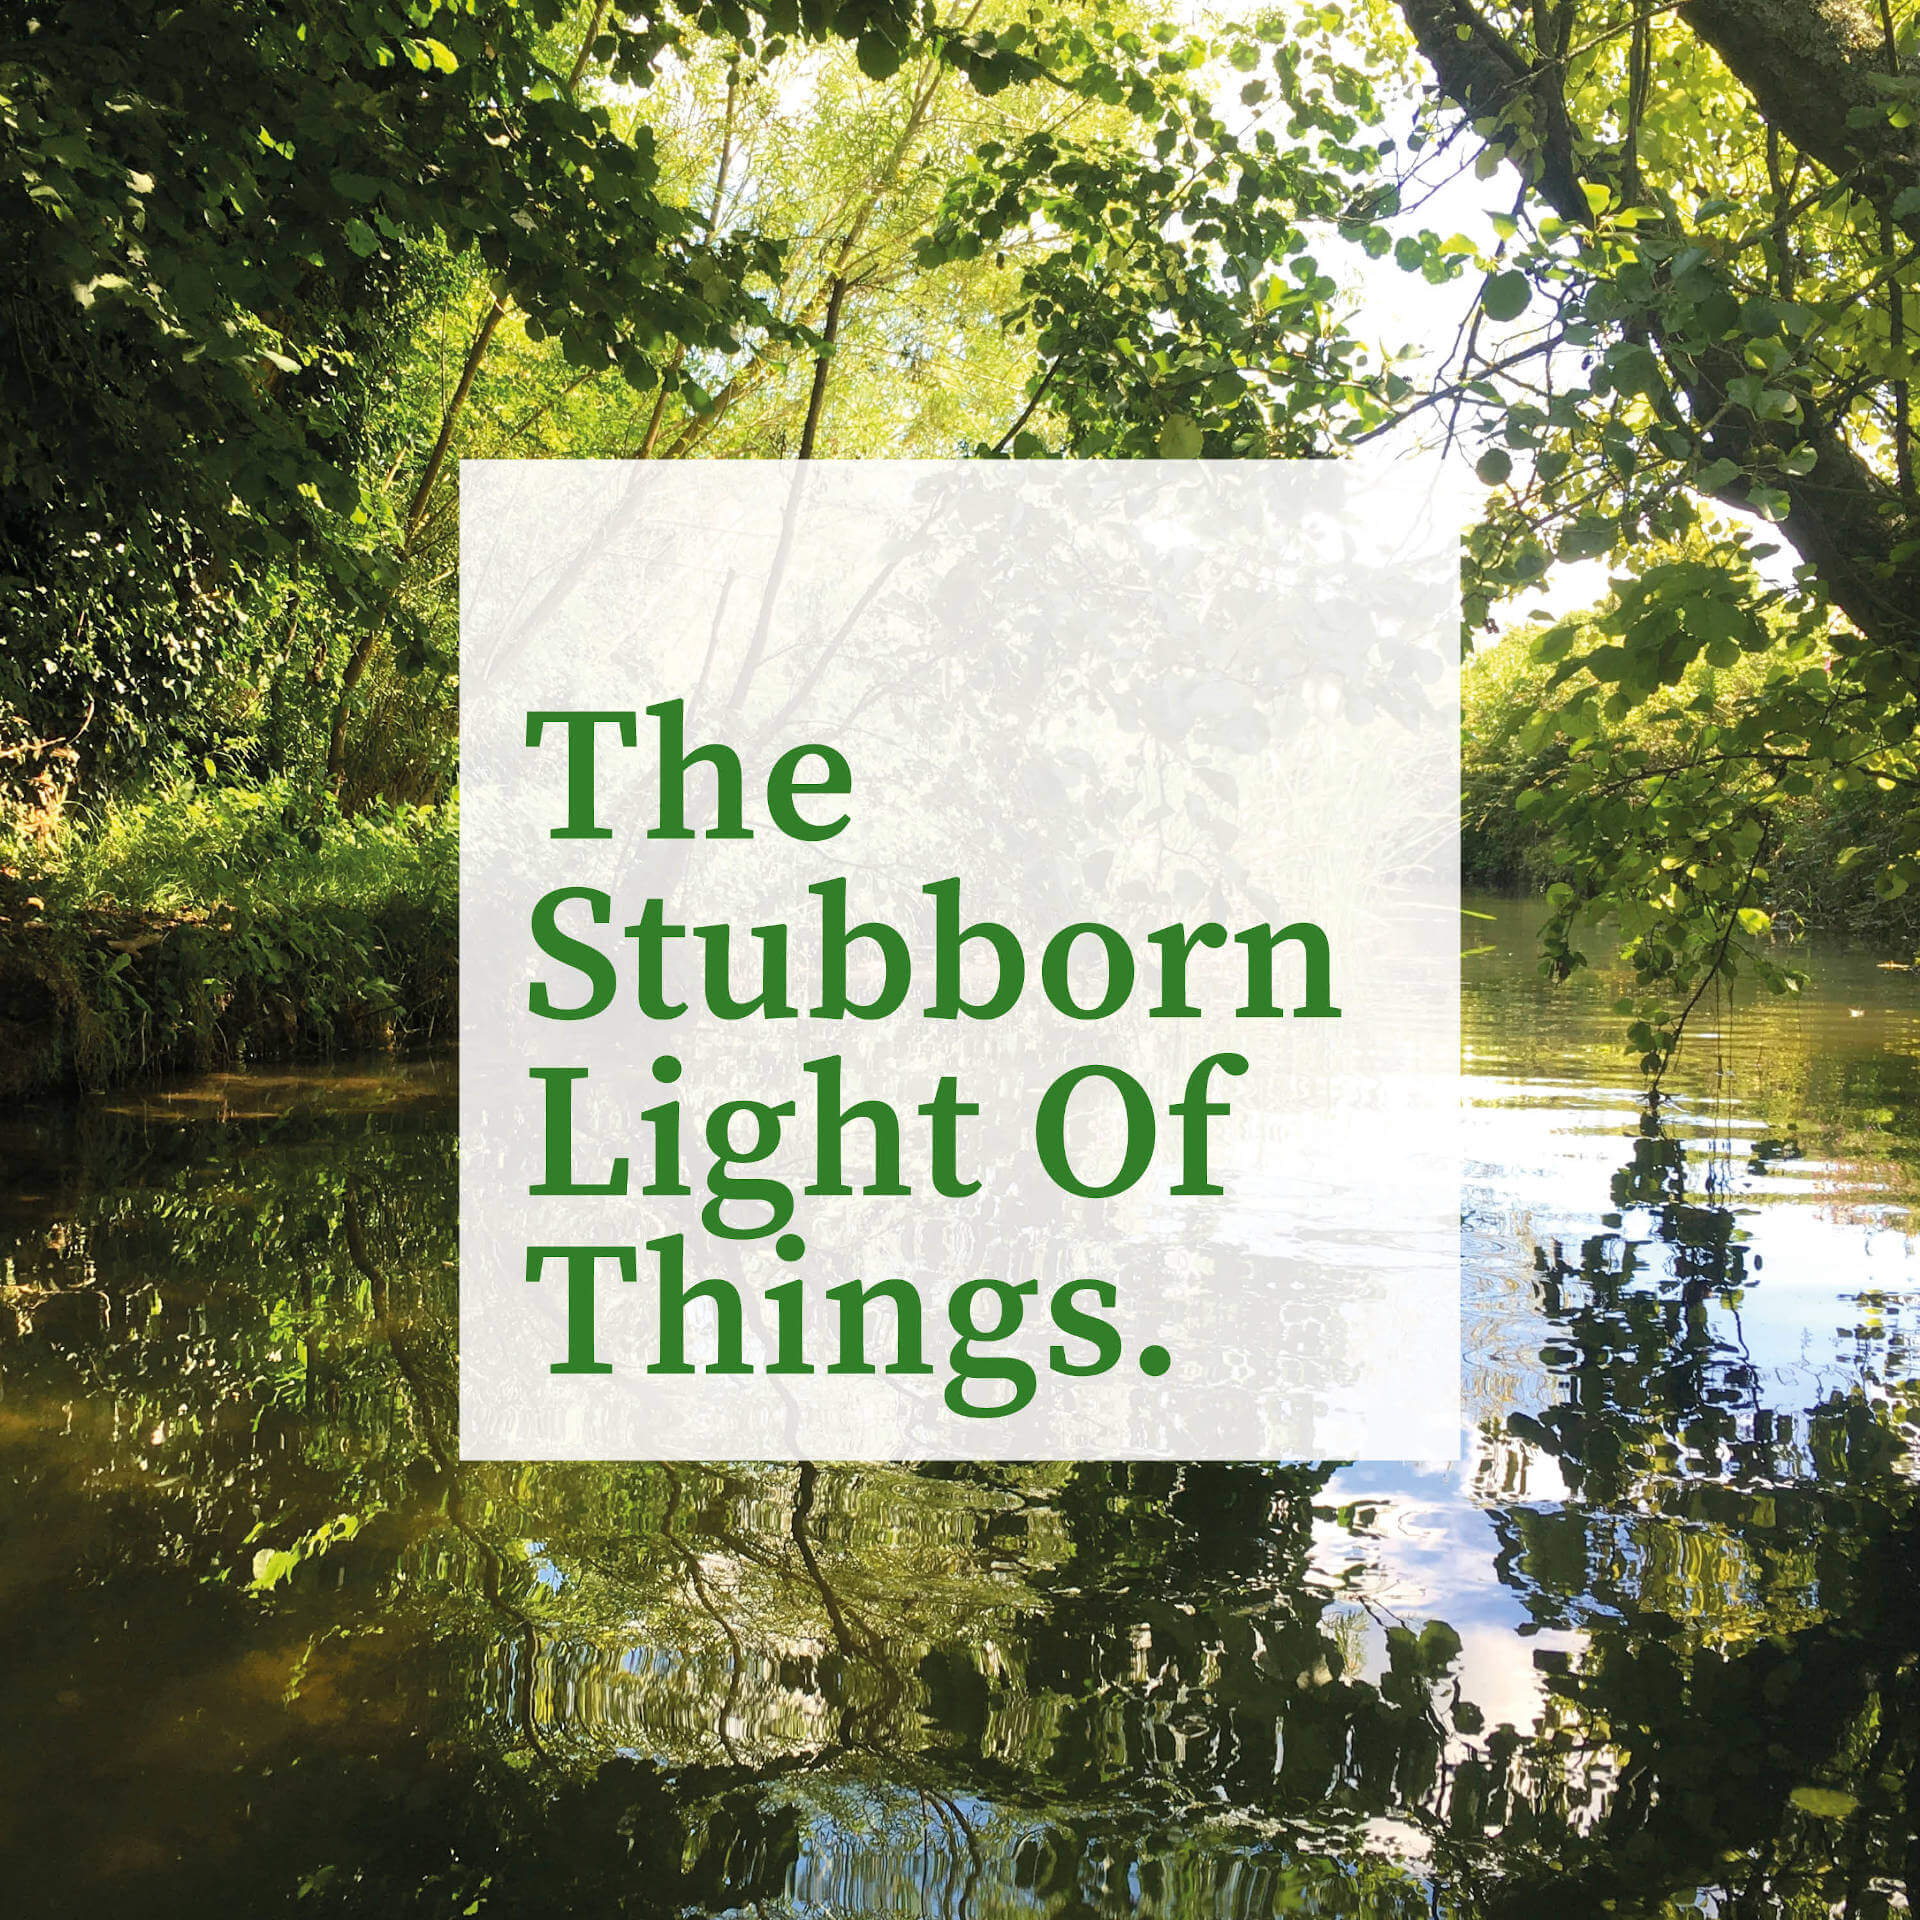 The Stubborn Light of Things